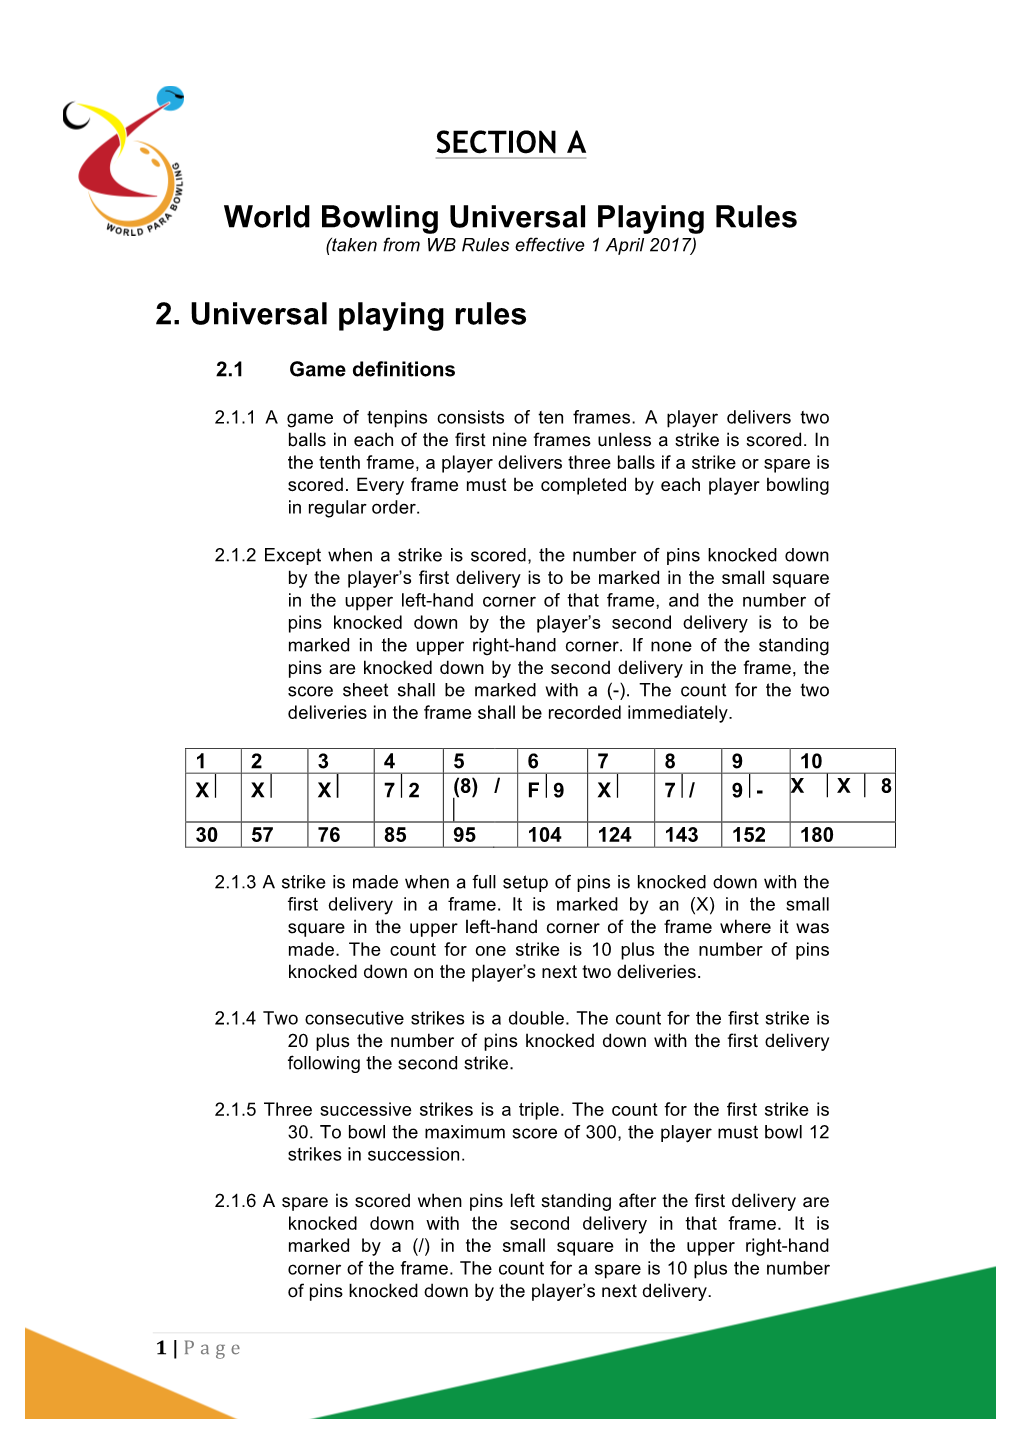 SECTION a World Bowling Universal Playing Rules